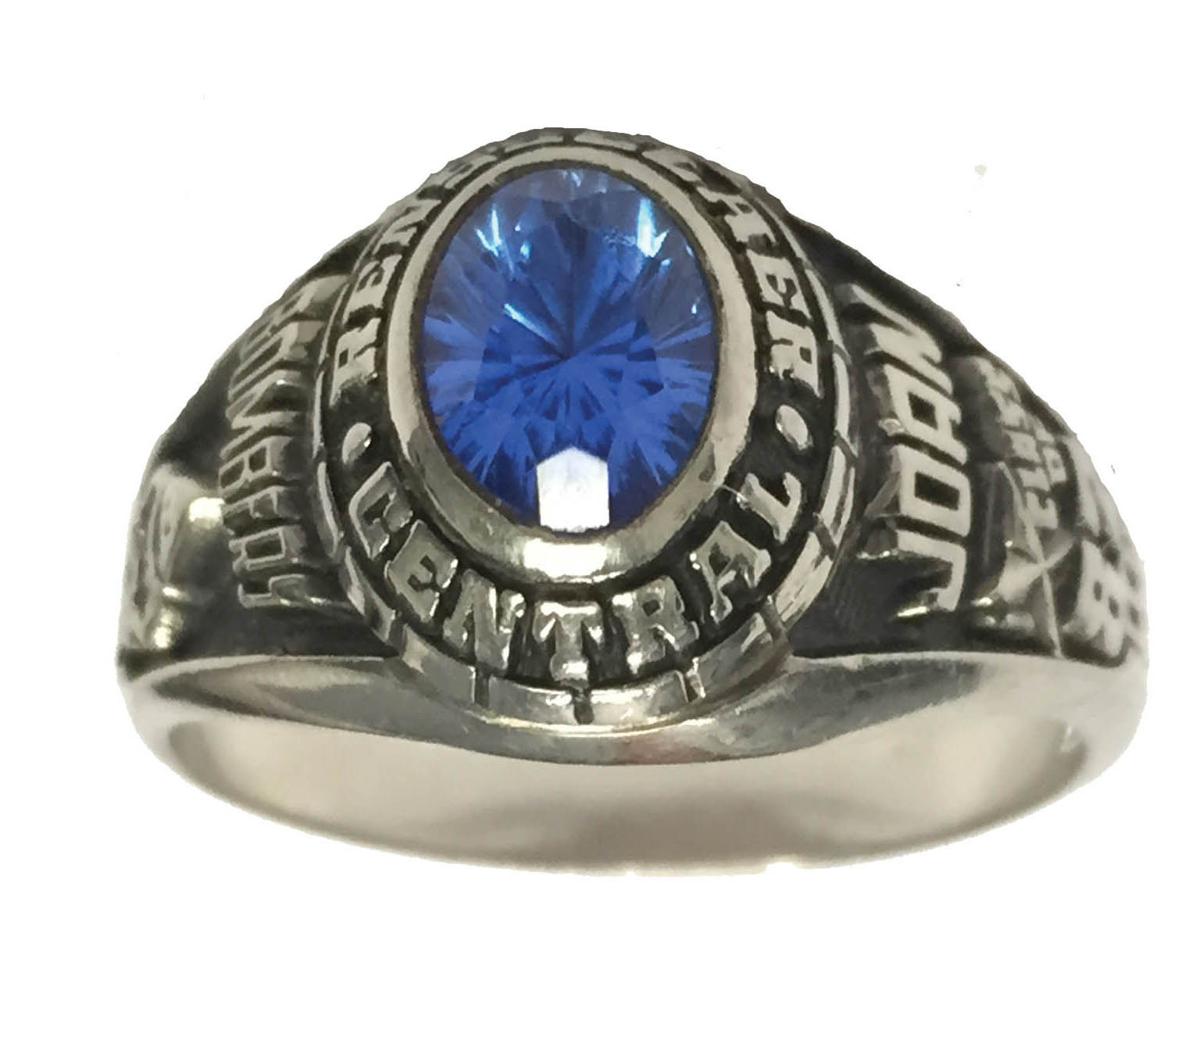 Woman reunited with RCHS class ring lost in 1984 | Rensselaer ...